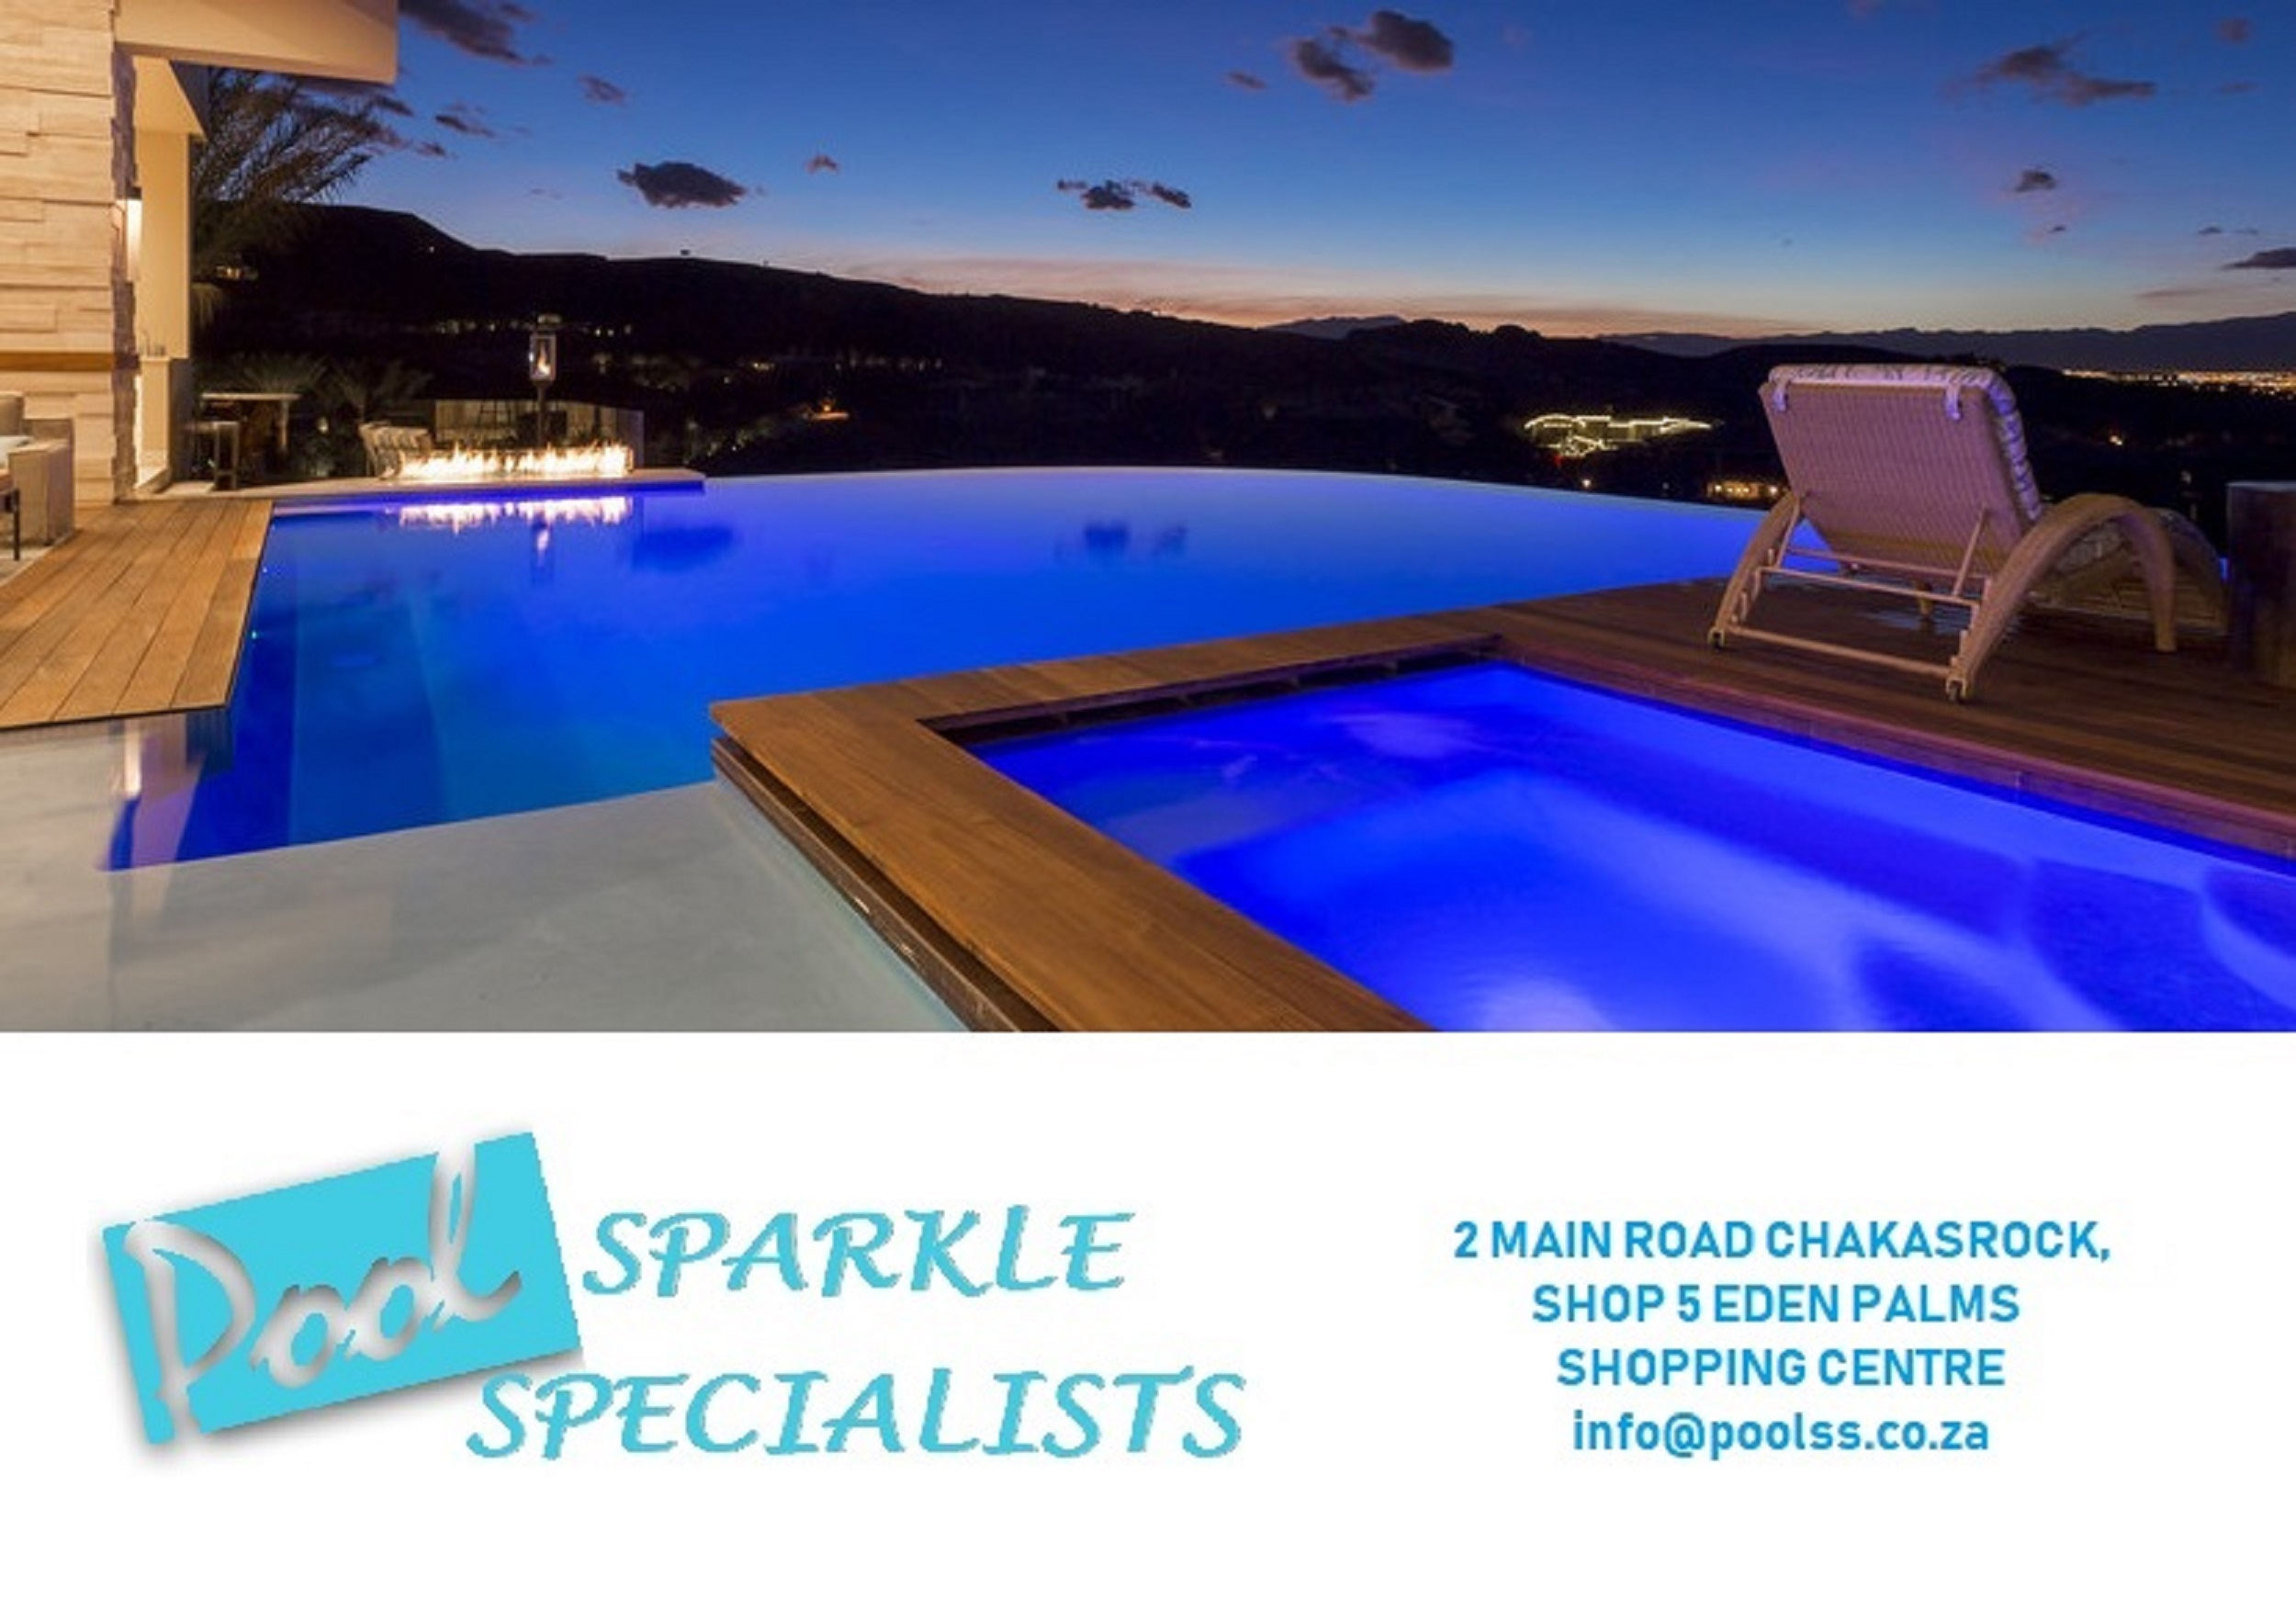 Putting the Sparkle in every pool